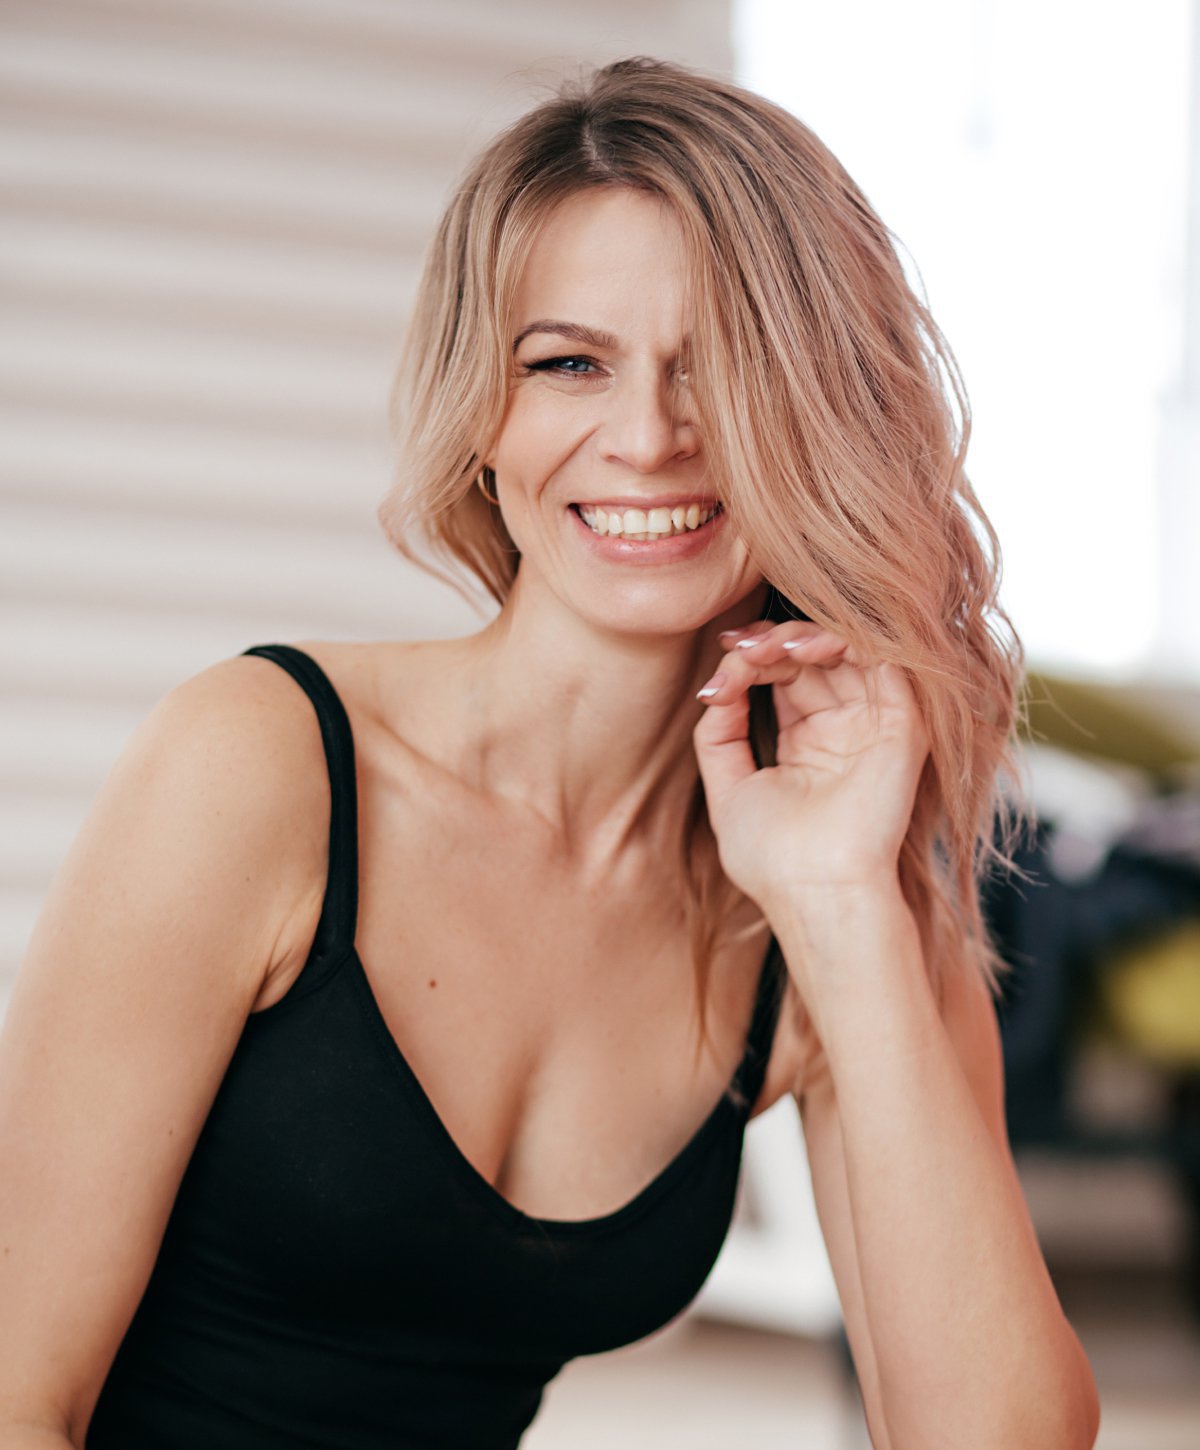 blepharoplasty patient model sitting in a chair smiling wearing a black tank top